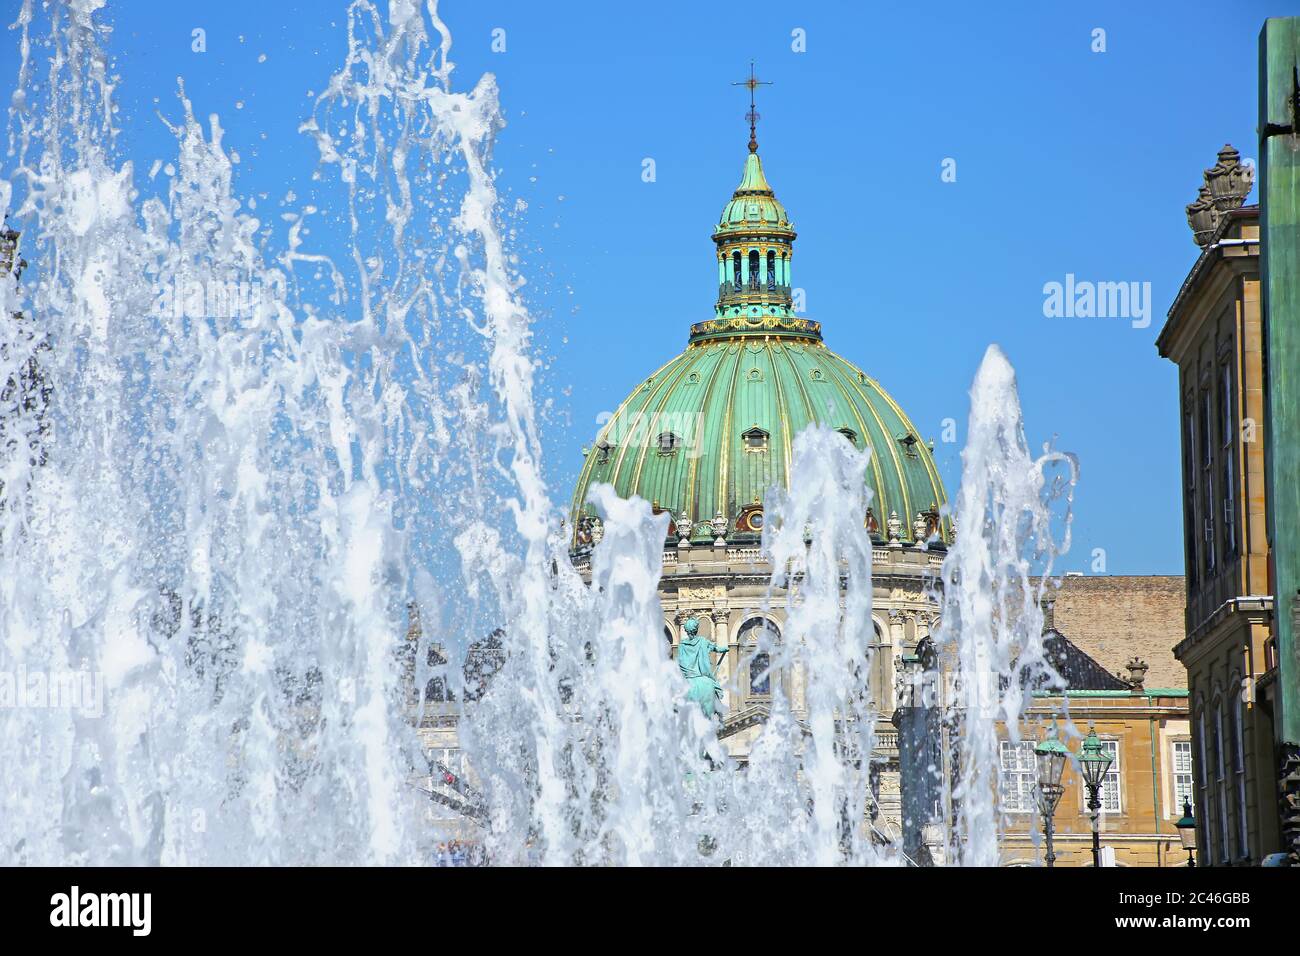 Fountain of water with Amalienborg Palace Square and a statue of Frederick V on a horse in the background, Copenhagen, Denmark. Stock Photo